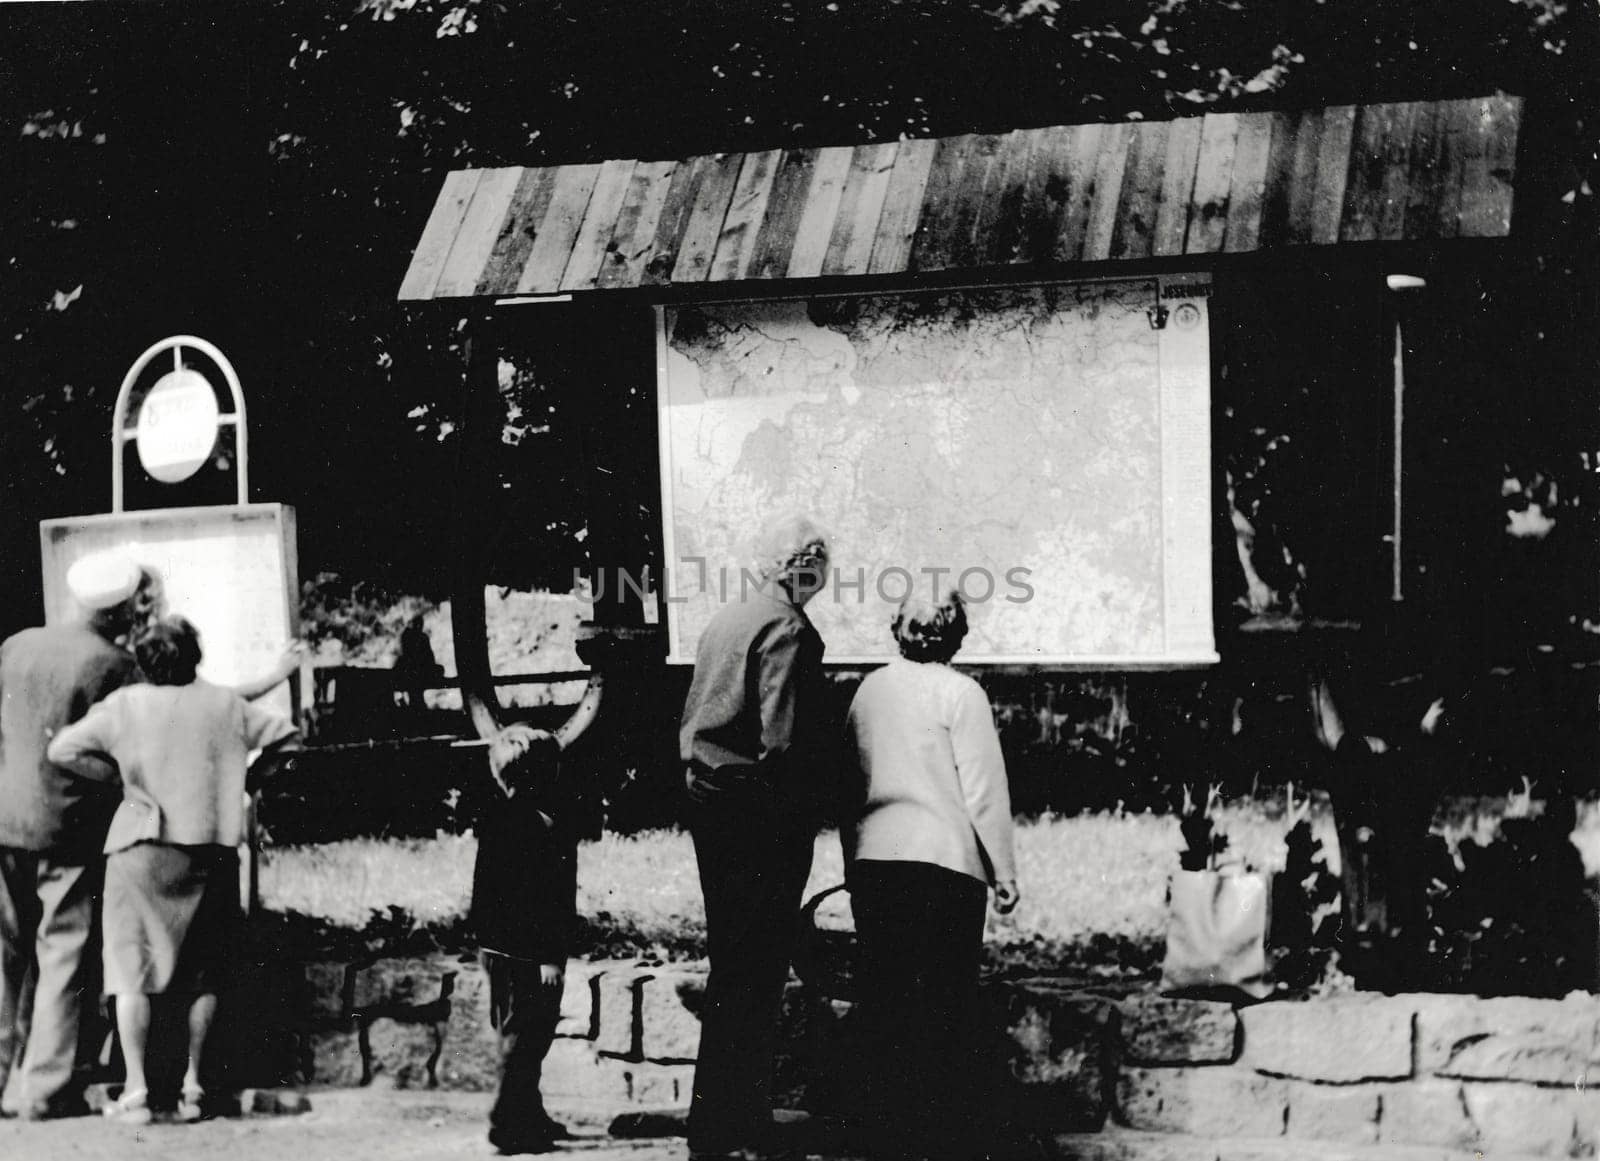 THE CZECHOSLOVAK SOCIALIST REPUBLIC - CIRCA 1960s: Retro photo shows people look at the touristic map. Black & white vintage photography